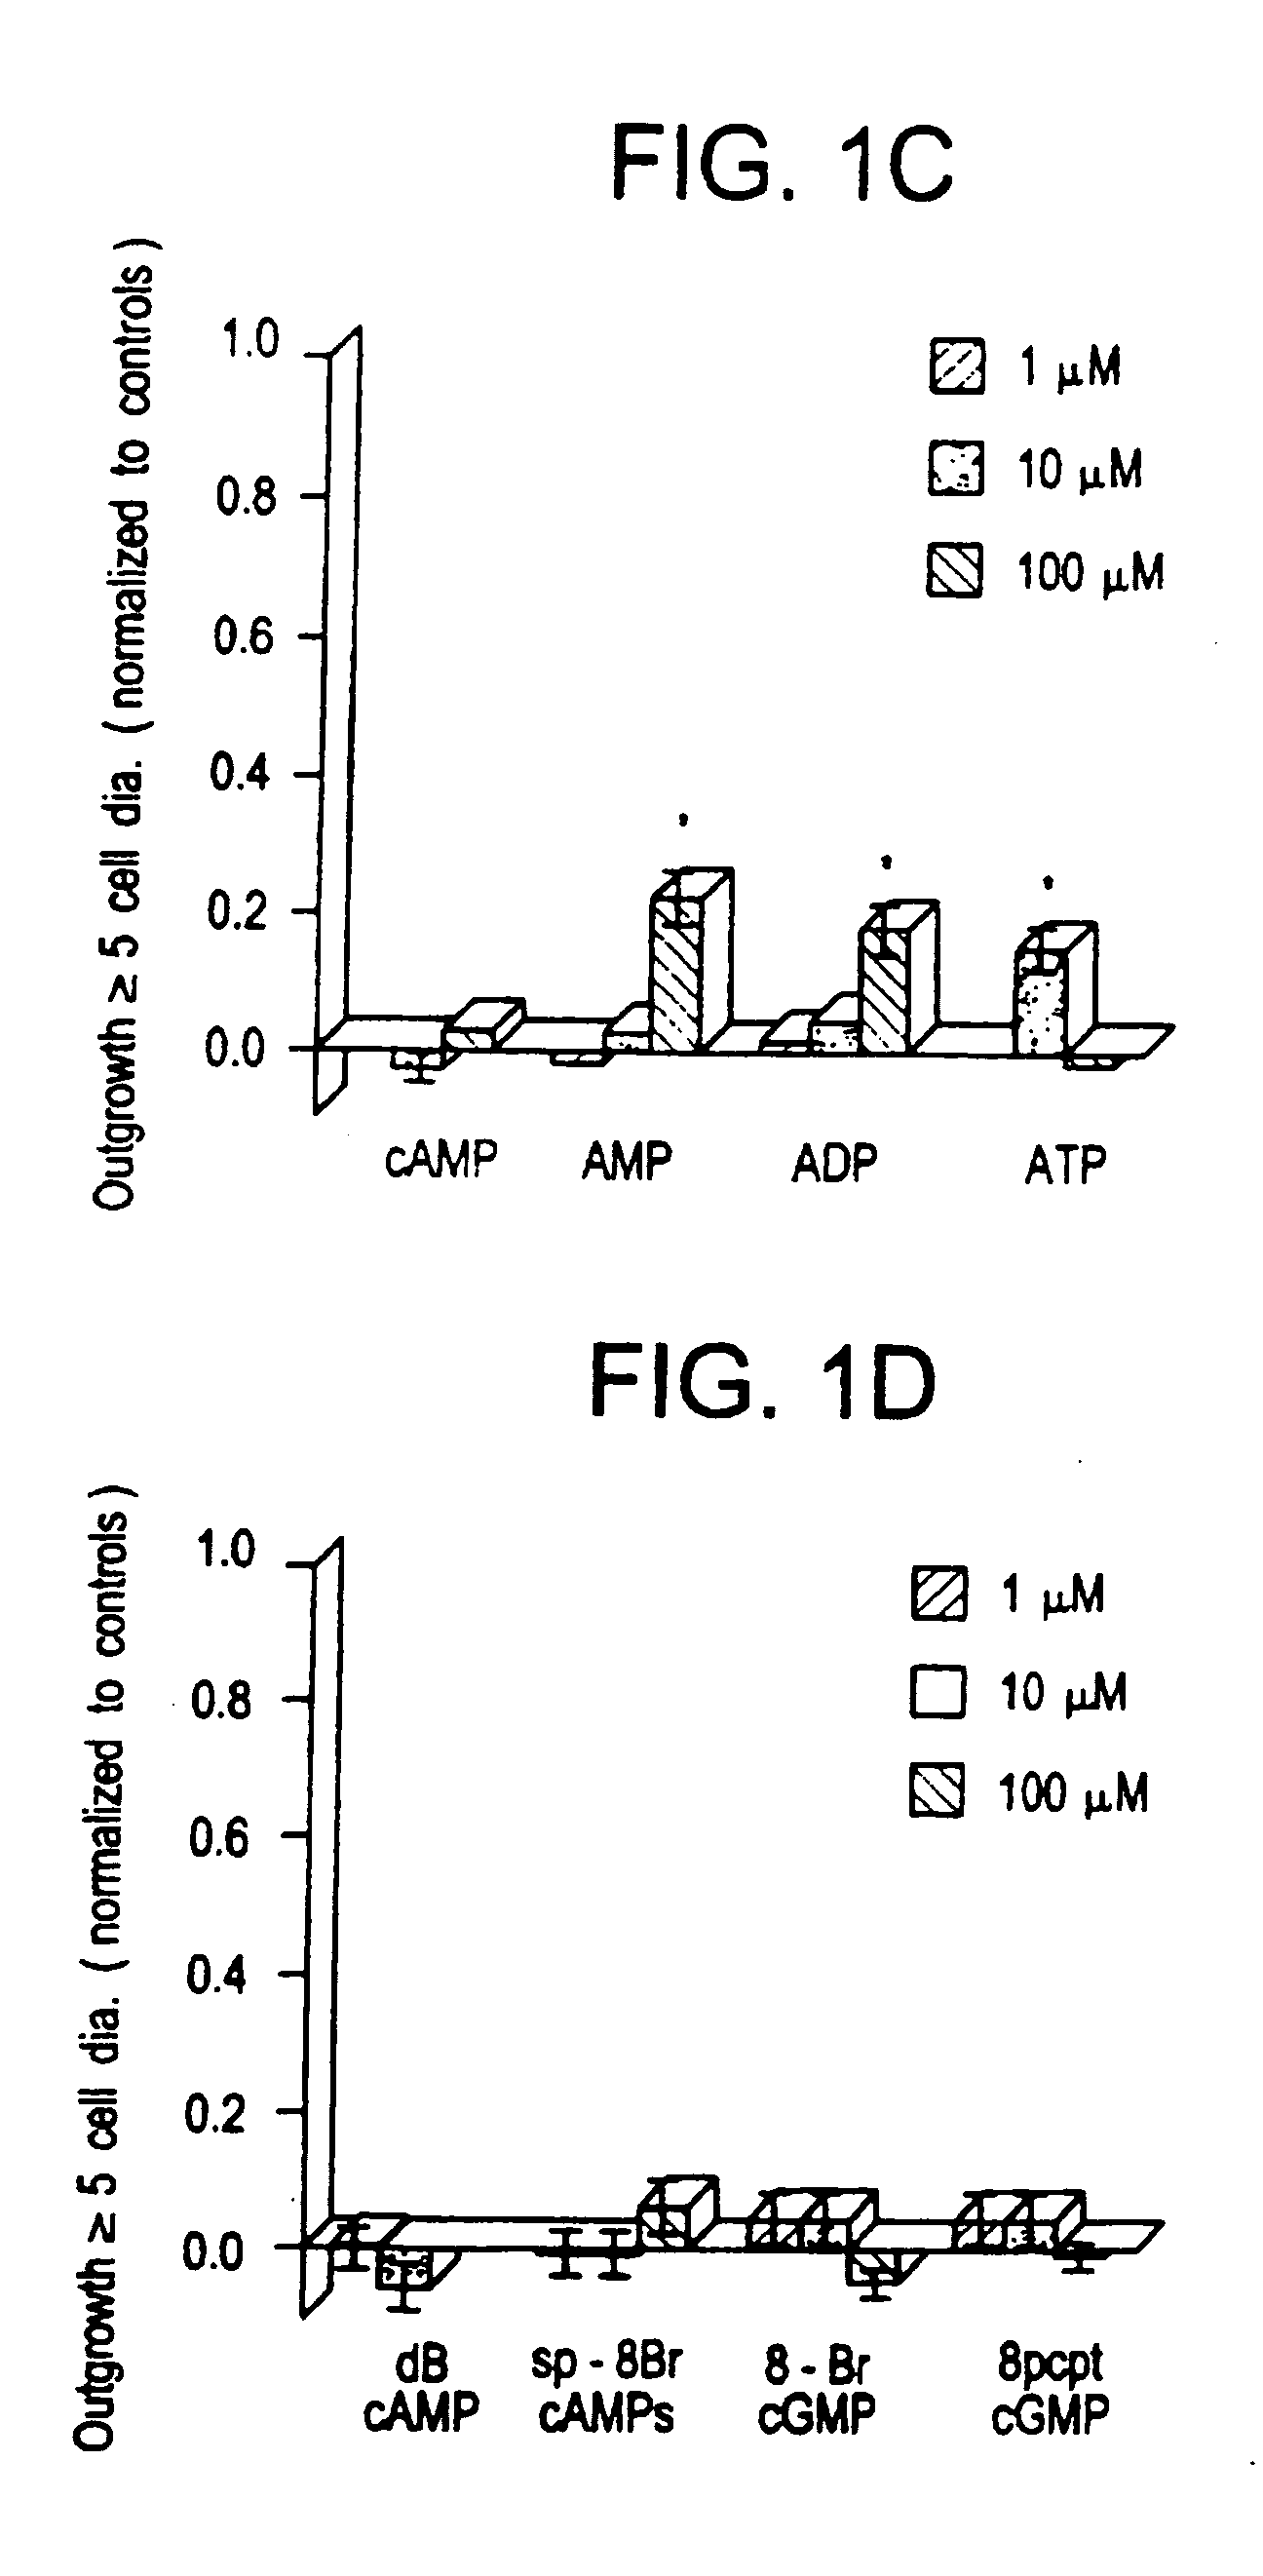 Methods for modulating the axonal outgrowth of central nervous system neurons